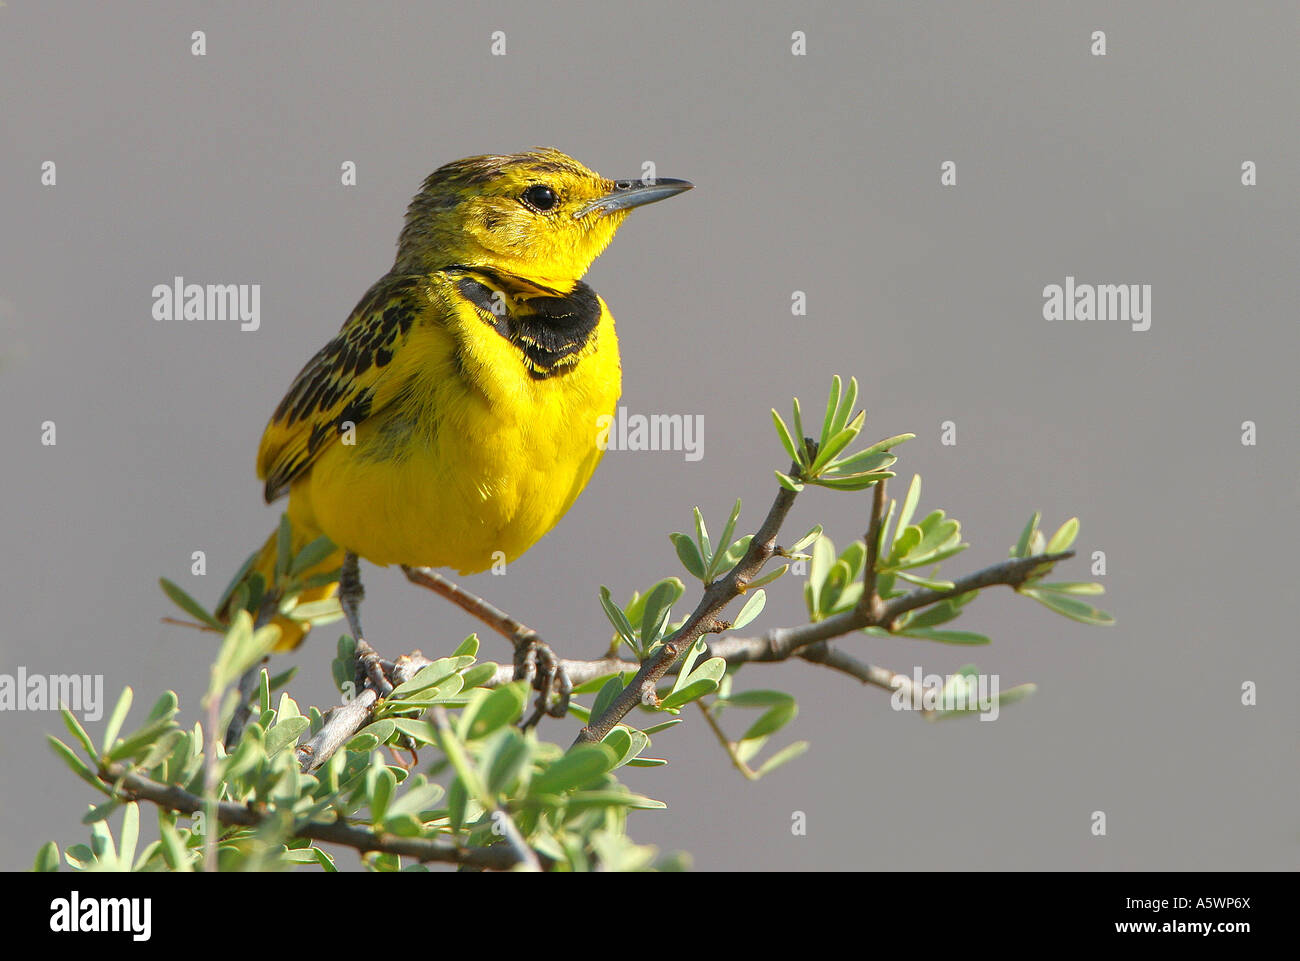 Golden Pipit on branch Stock Photo